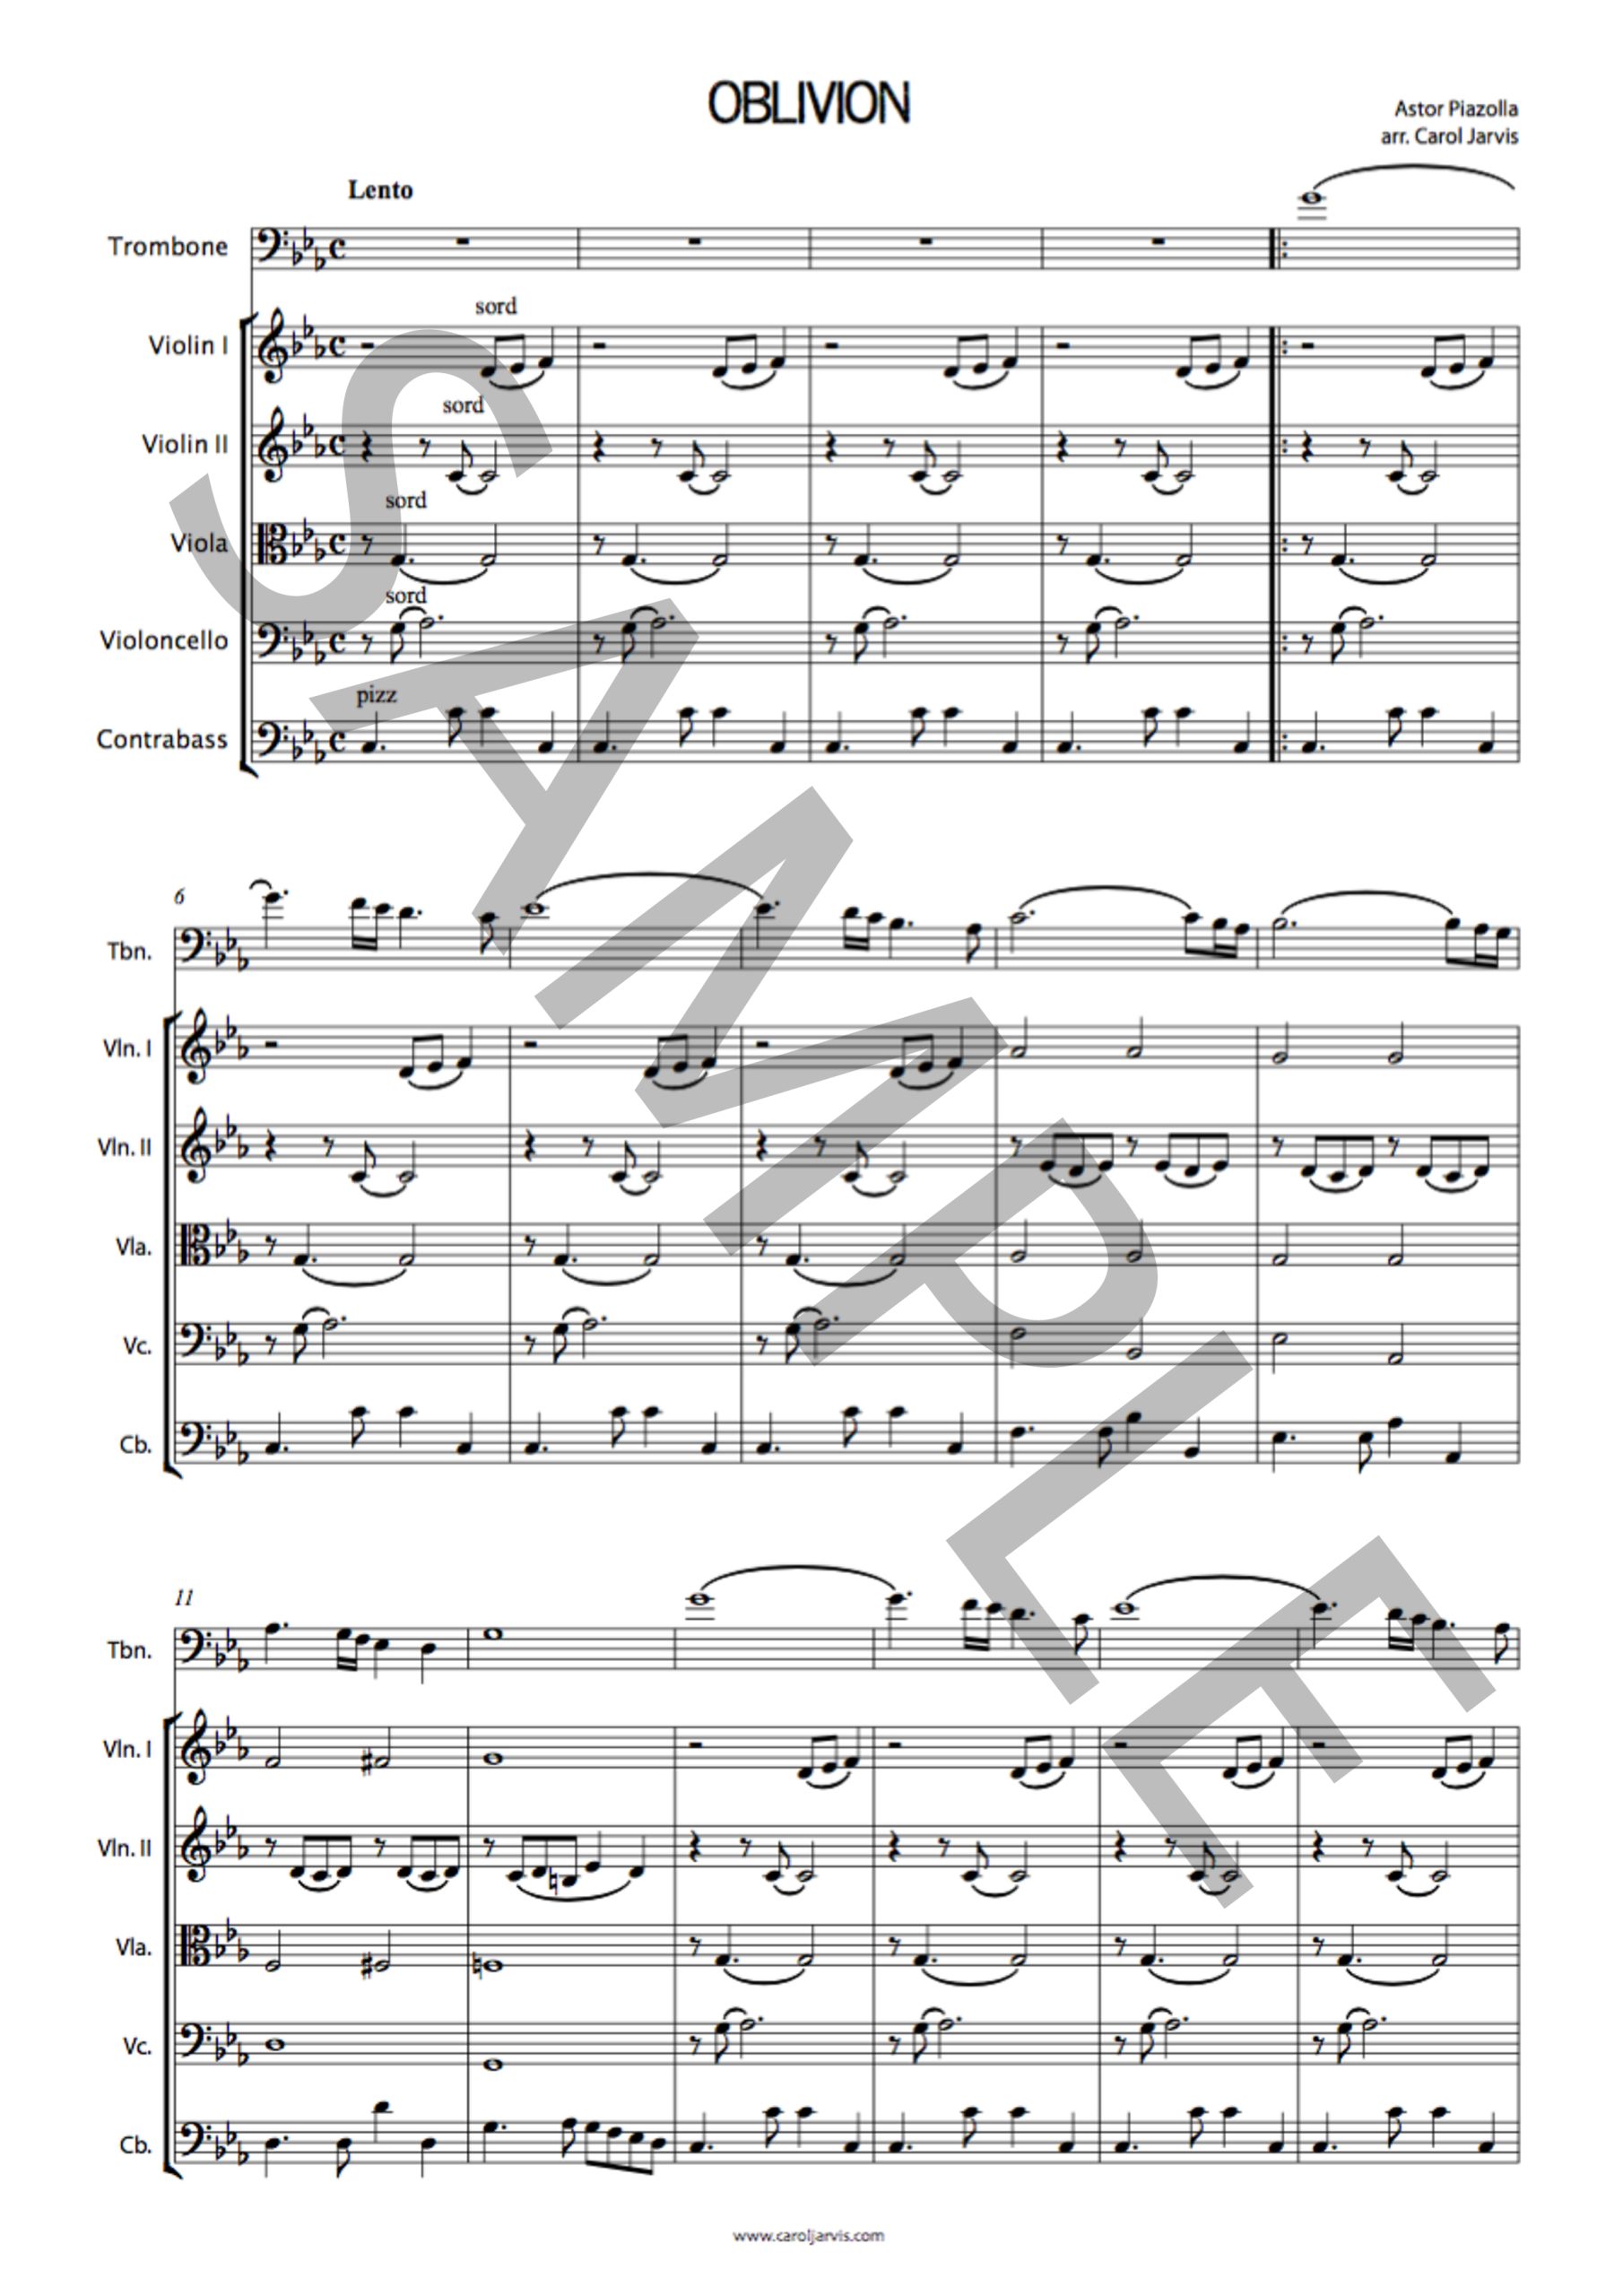 Oblivion _ for solo trombone and string quintet